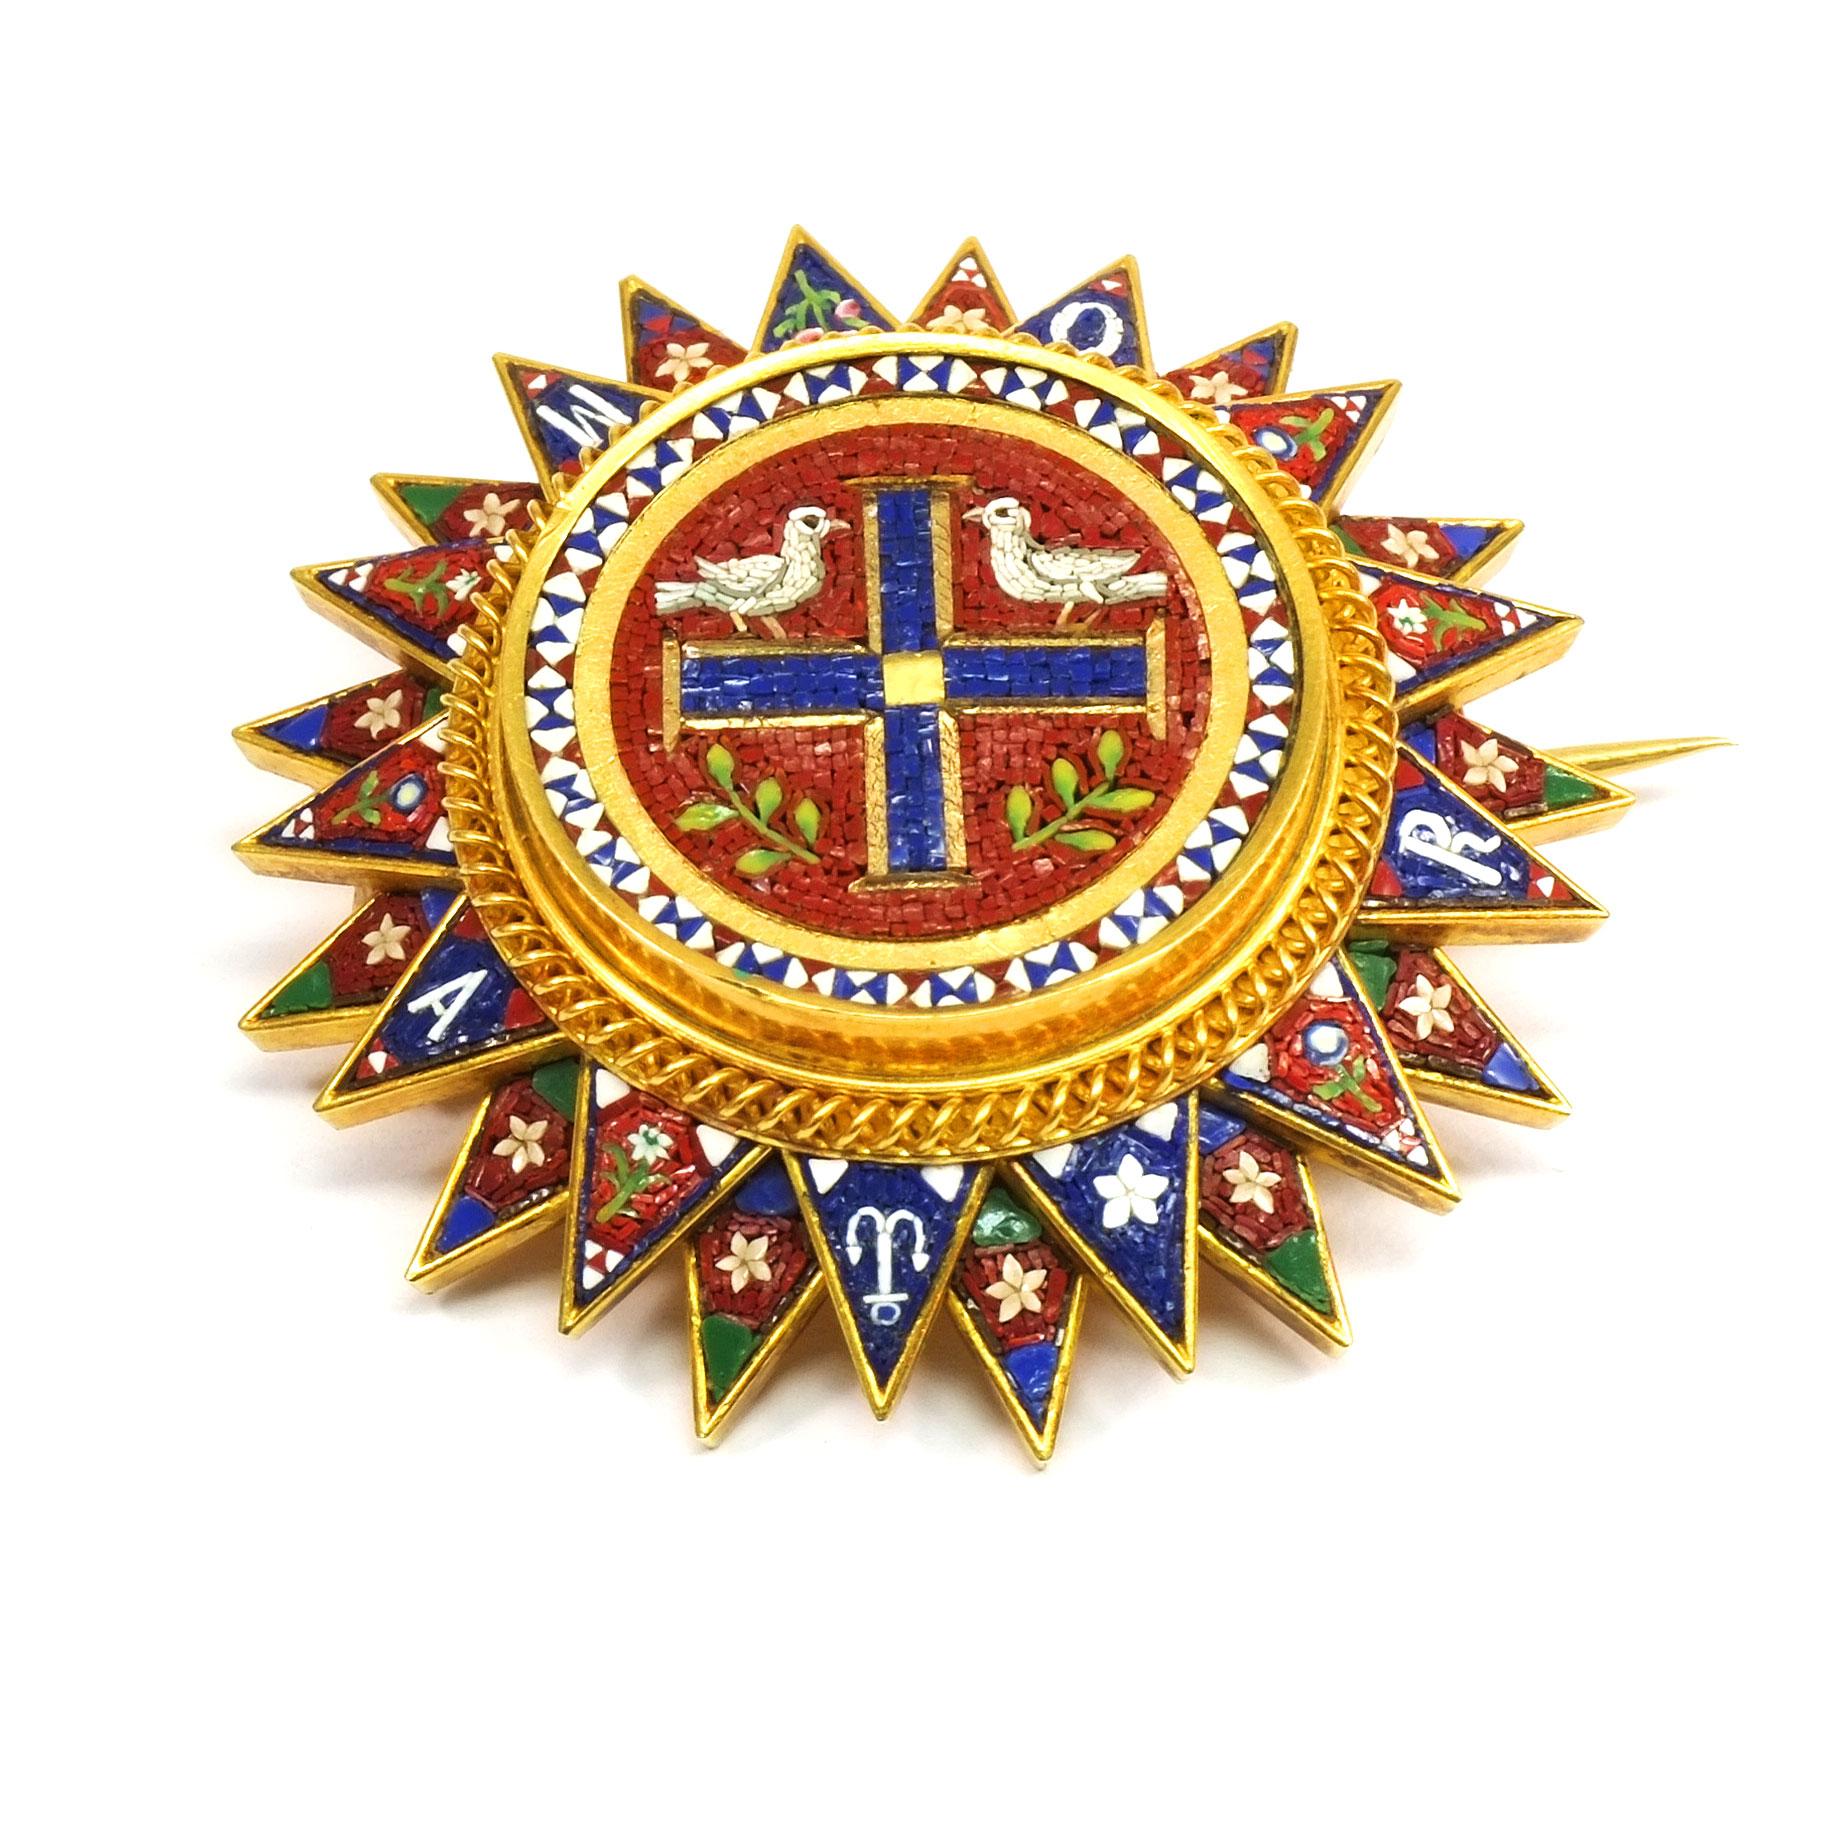 Antique Micromosaic Etruscan Revival Gold Brooch, Rome circa 1860

This antique Italian brooch is finely crafted in 18K gold and designed in the shape of a star. The detailed Micromosaic features a multicolored glass tesserae image of a gold framed